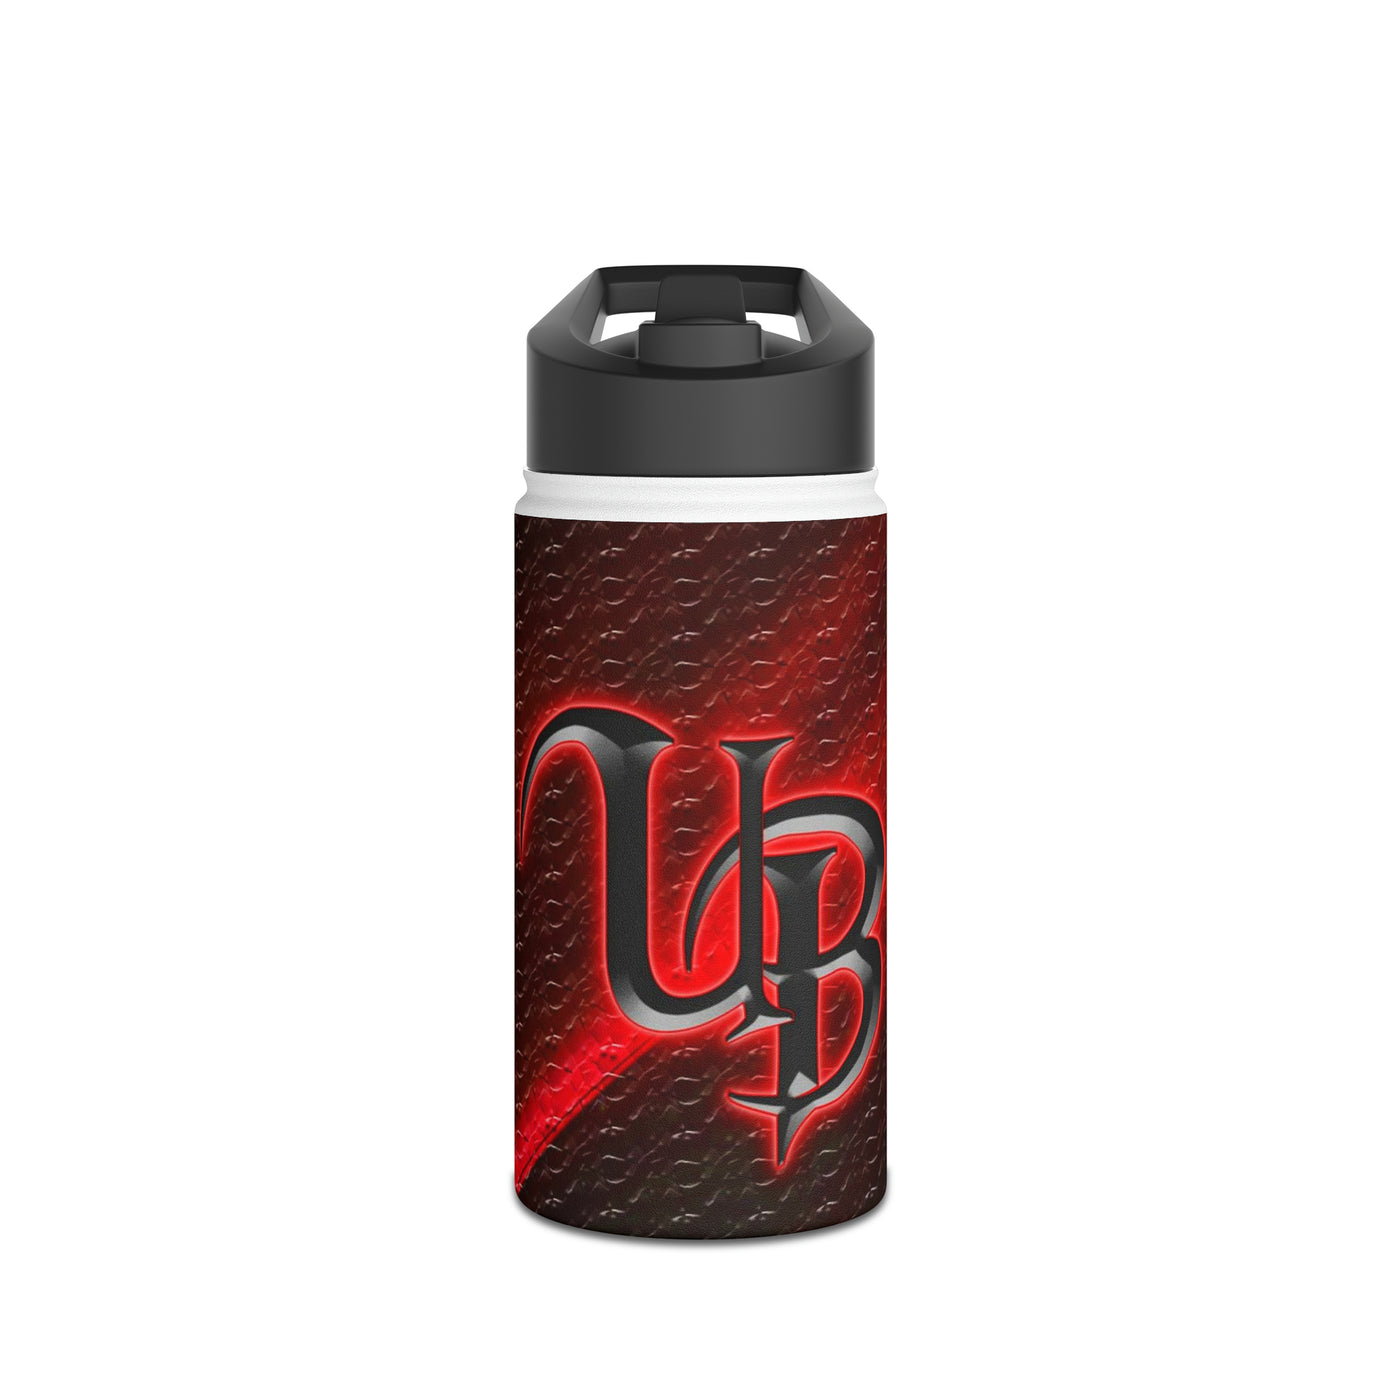  Stainless Steel Water Bottle with Standard Lid - Reusable and durable stainless steel bottle featuring a standard lid, ideal for hydration on-the-go during daily activities or workouts.